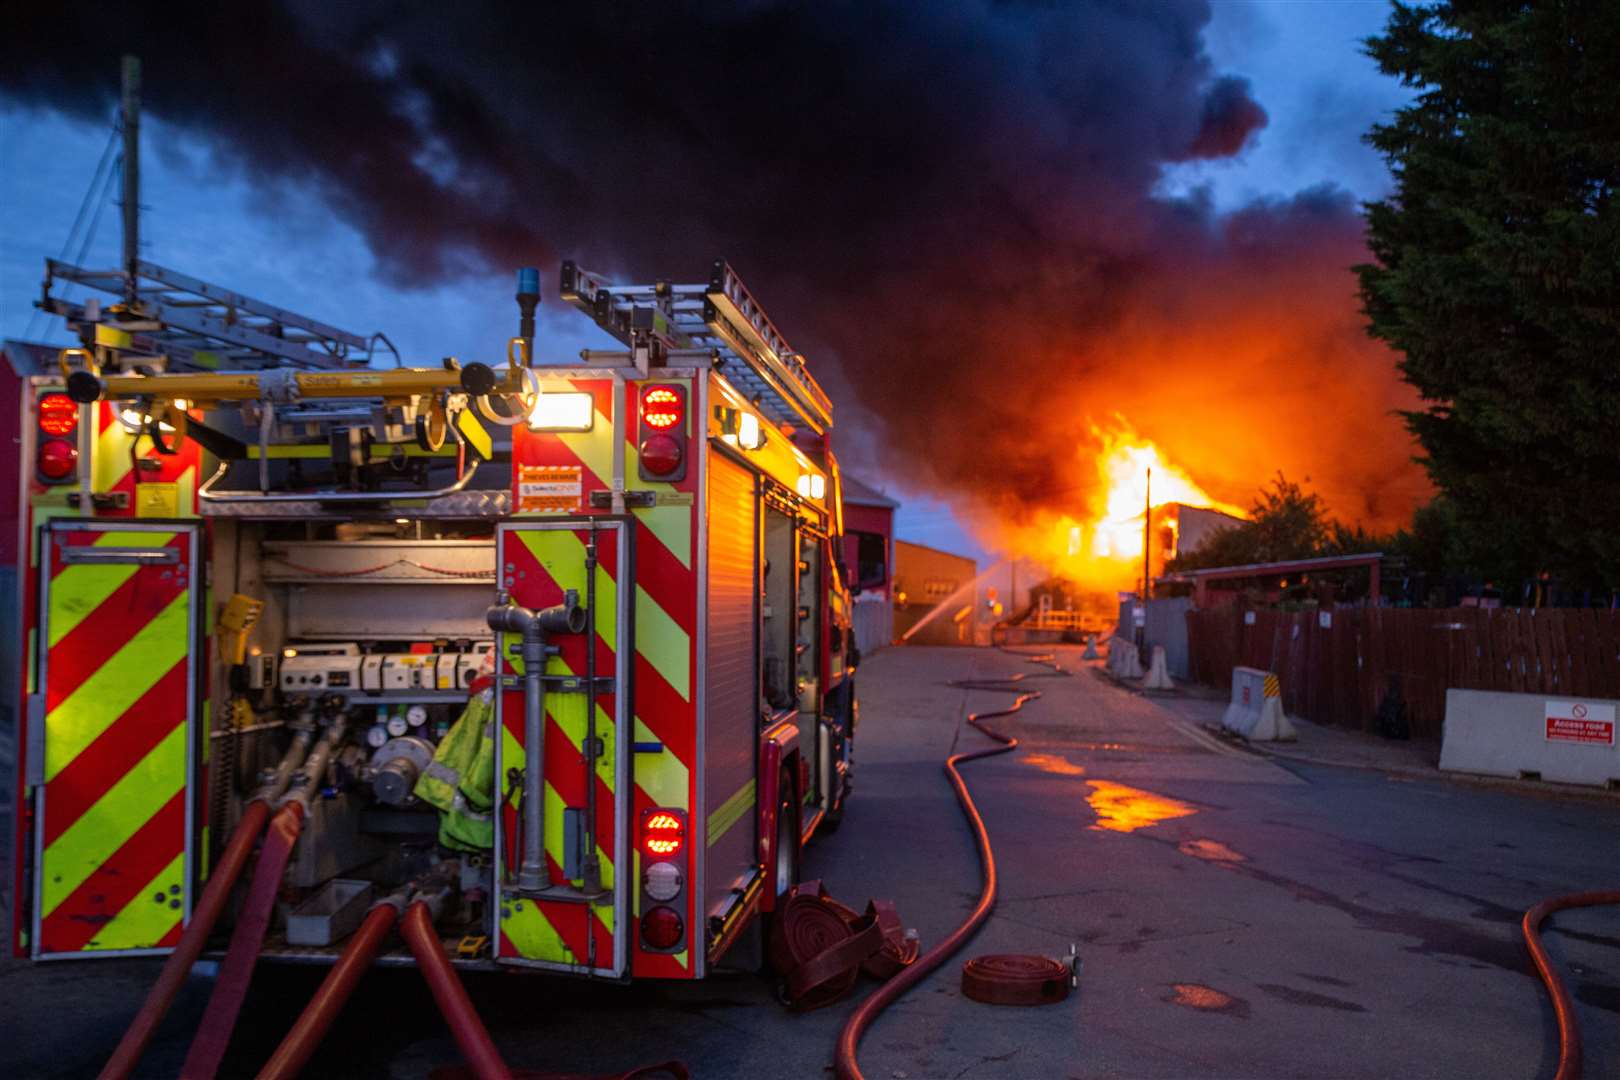 Kent Fire and Rescue Service at the scene of a fire on an industrial unit near Hoo Marina Park. Photos from Kent Fire and Rescue Service